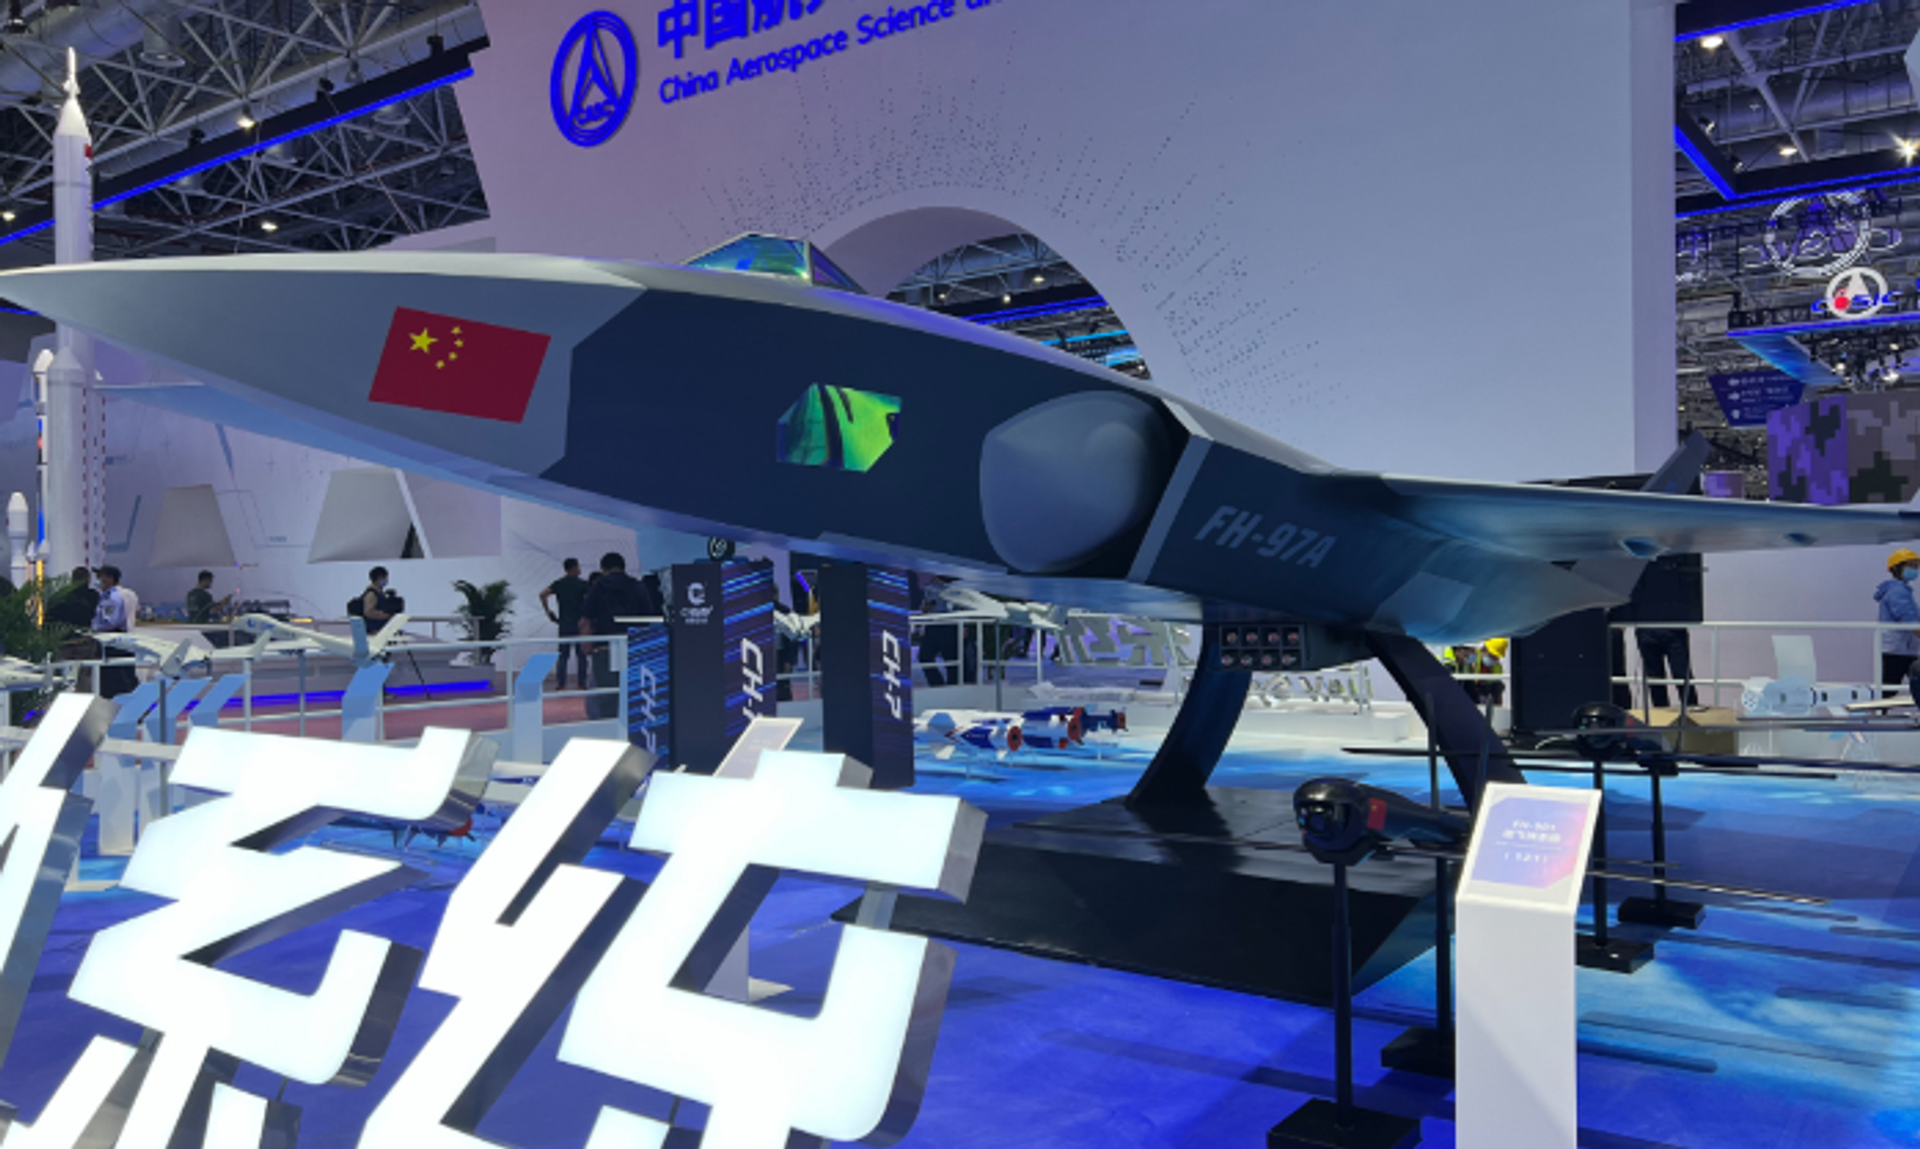 An FH-97A loyal wingman drone is exhibited for the first time at the Airshow China 2022, which is held from November 8 to 13 in Zhuhai, South China's Guangdong Province.  - Sputnik International, 1920, 15.11.2022